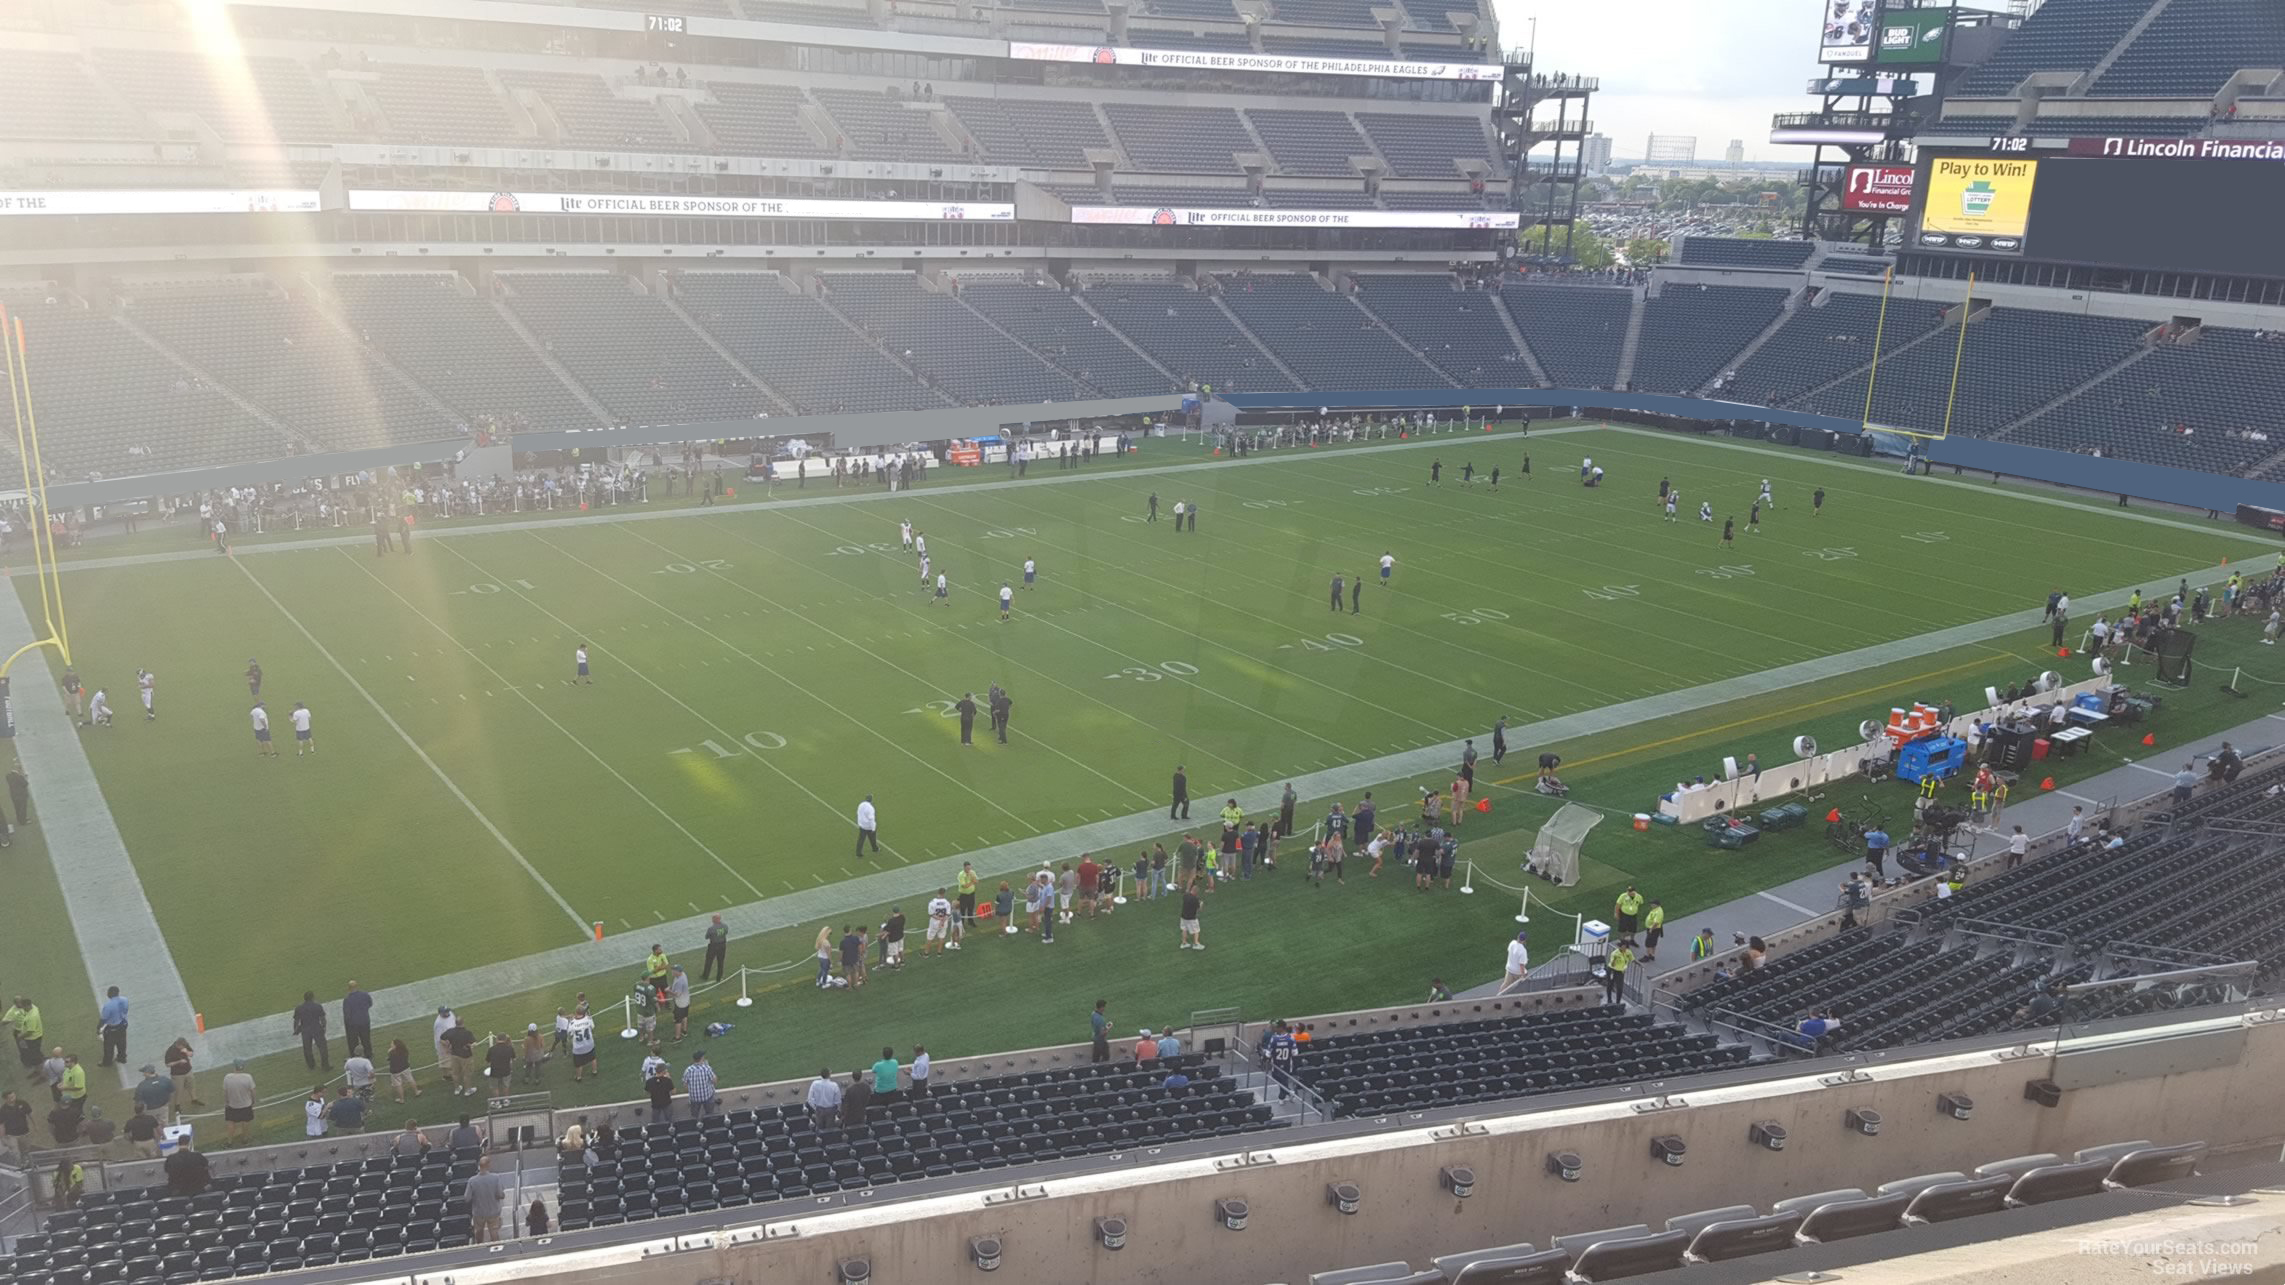 section c17, row 7 seat view  for football - lincoln financial field